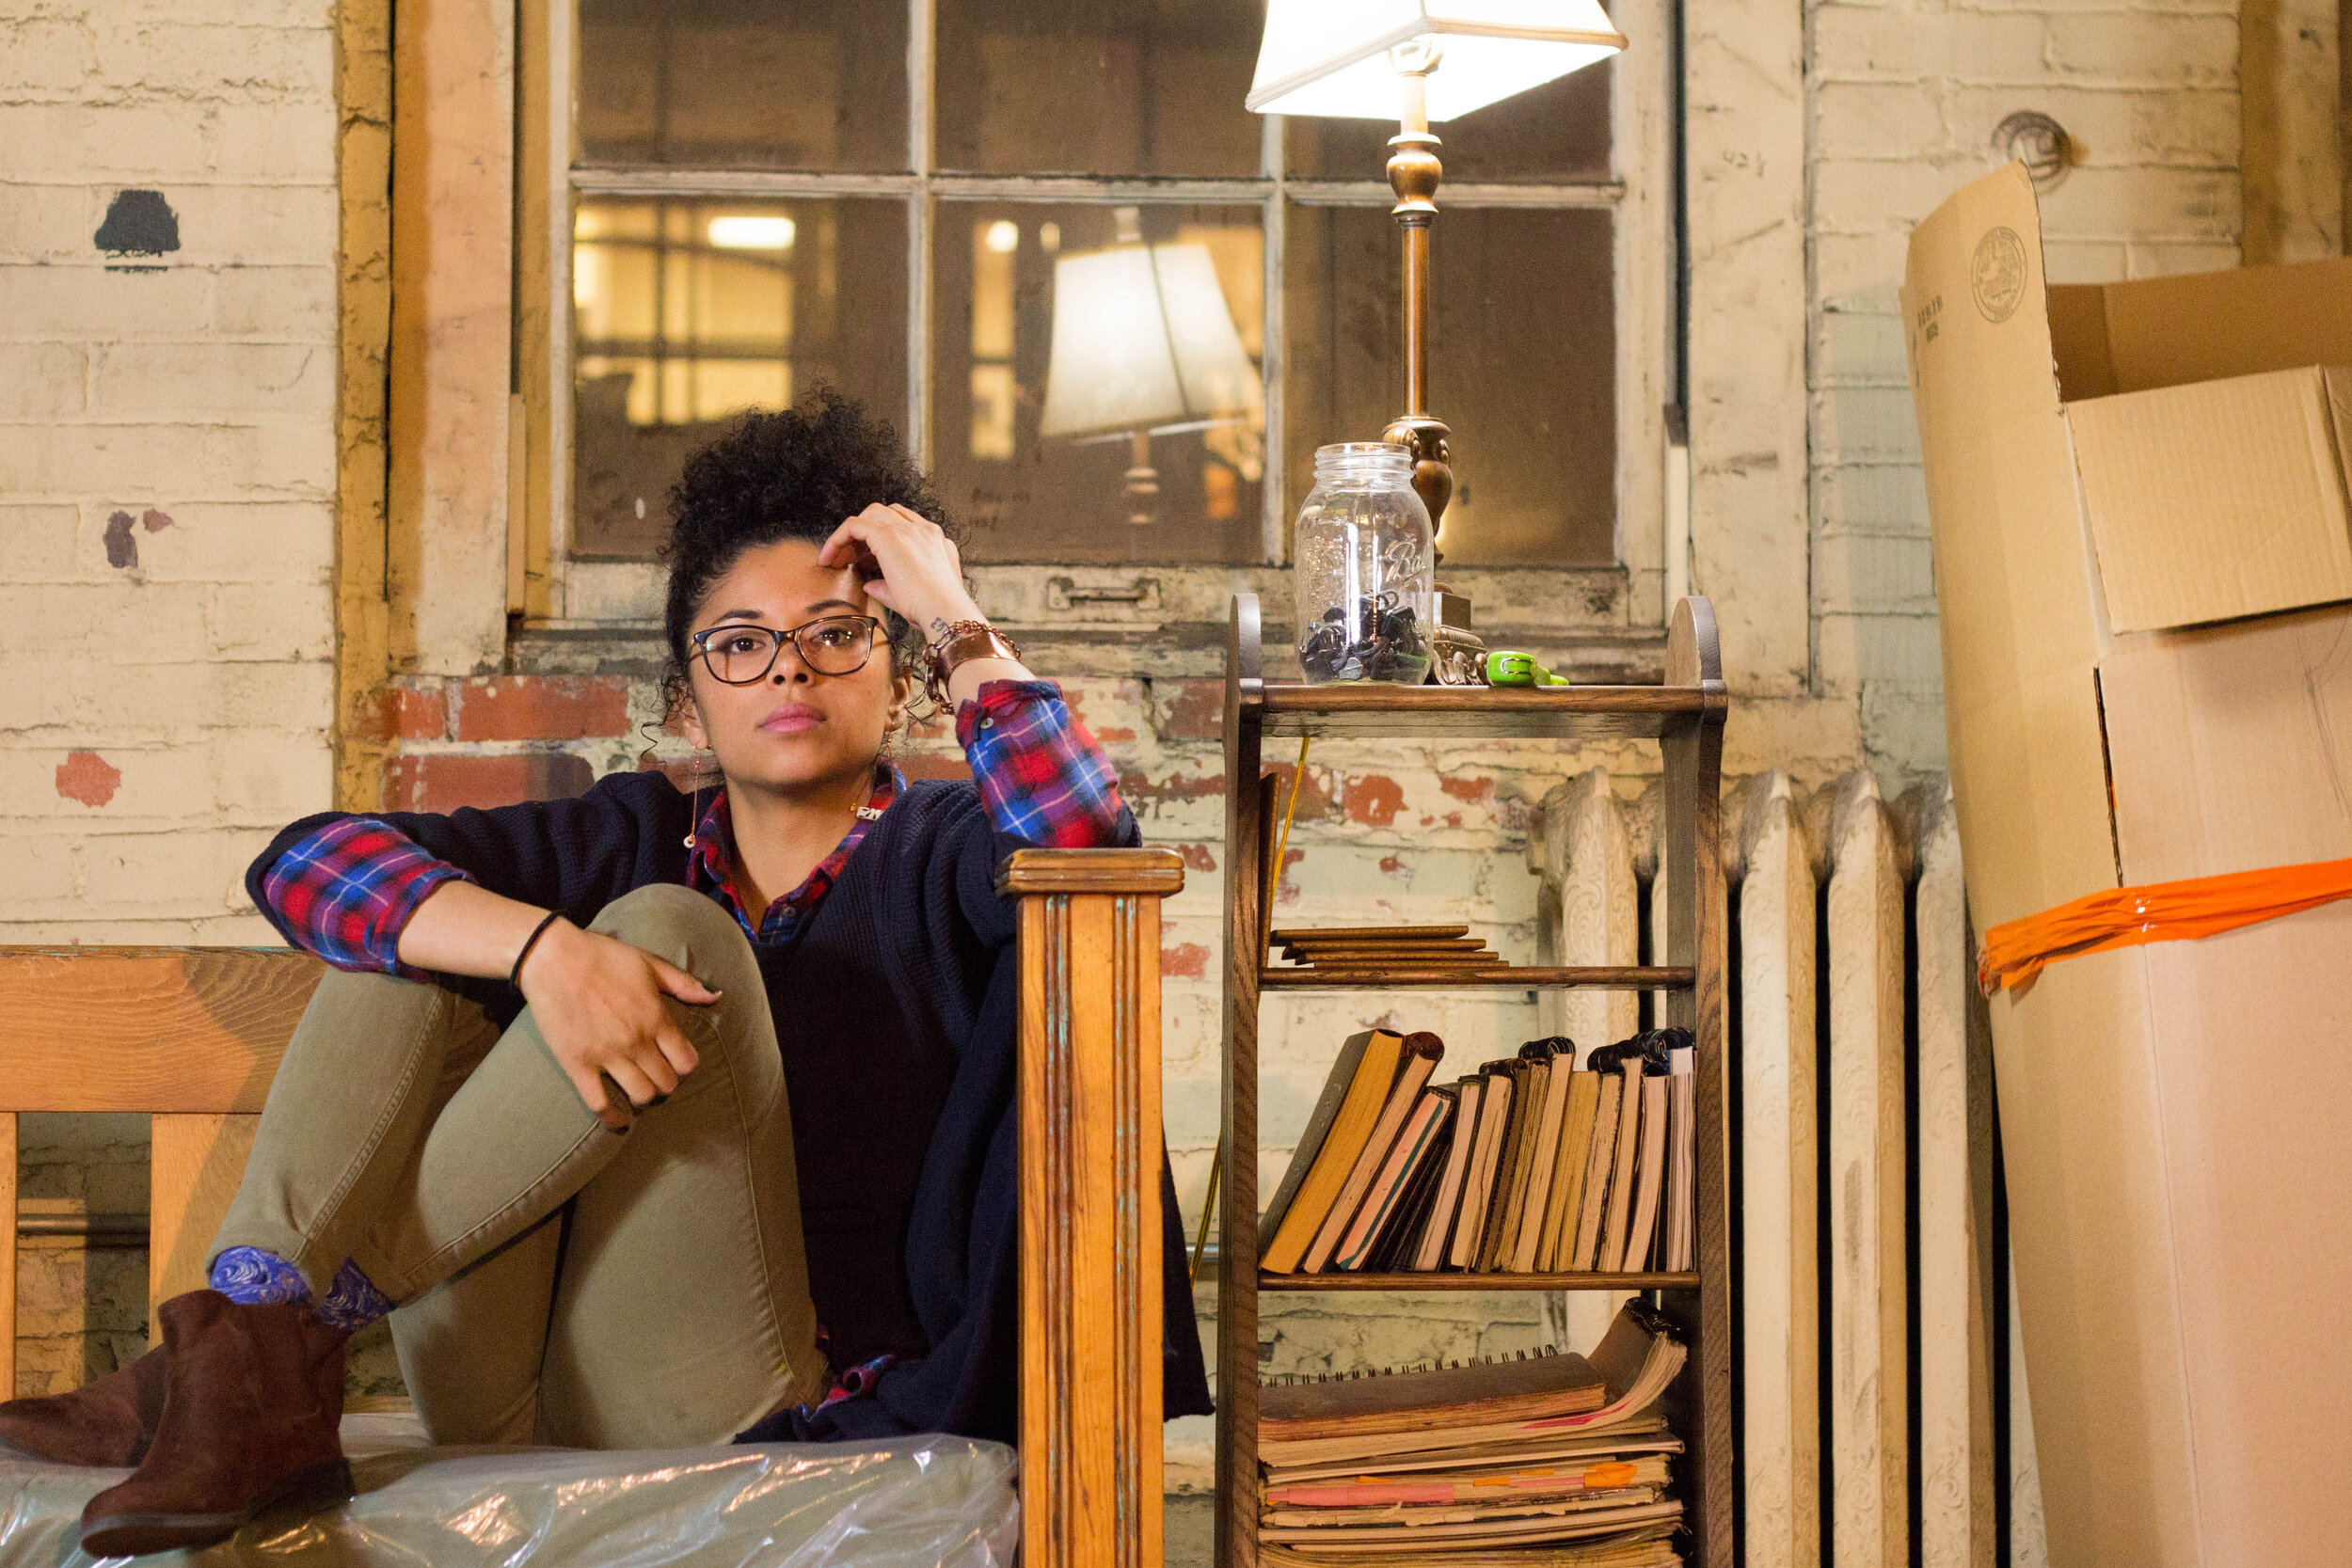 A portrait of Moe Gram sitting in an industrial building next to stacks of books and a table lamp